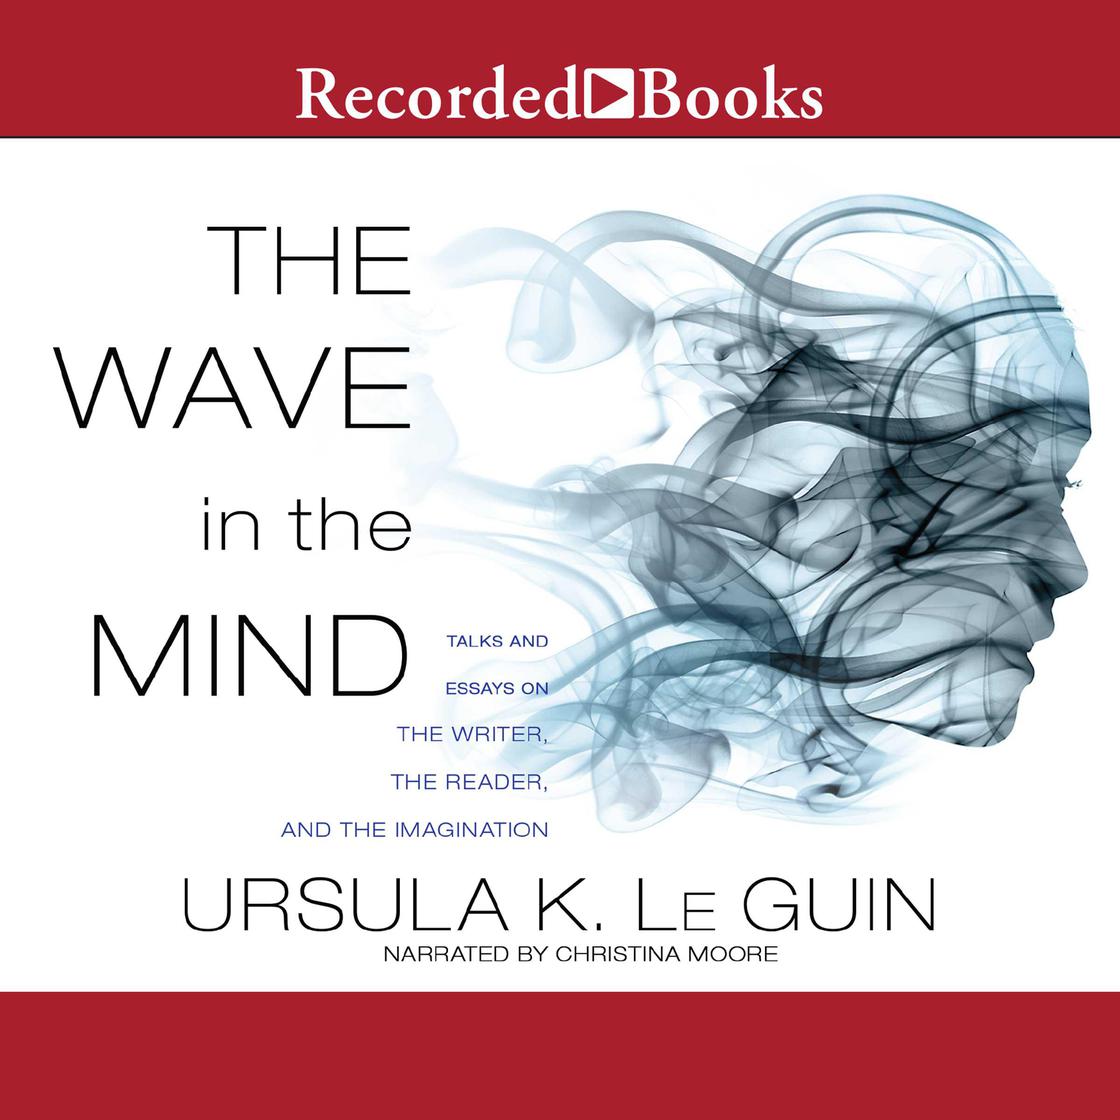 Ursula K. Le Guin: The wave in the mind (AudiobookFormat, 2018, Recorded Books, Inc.)